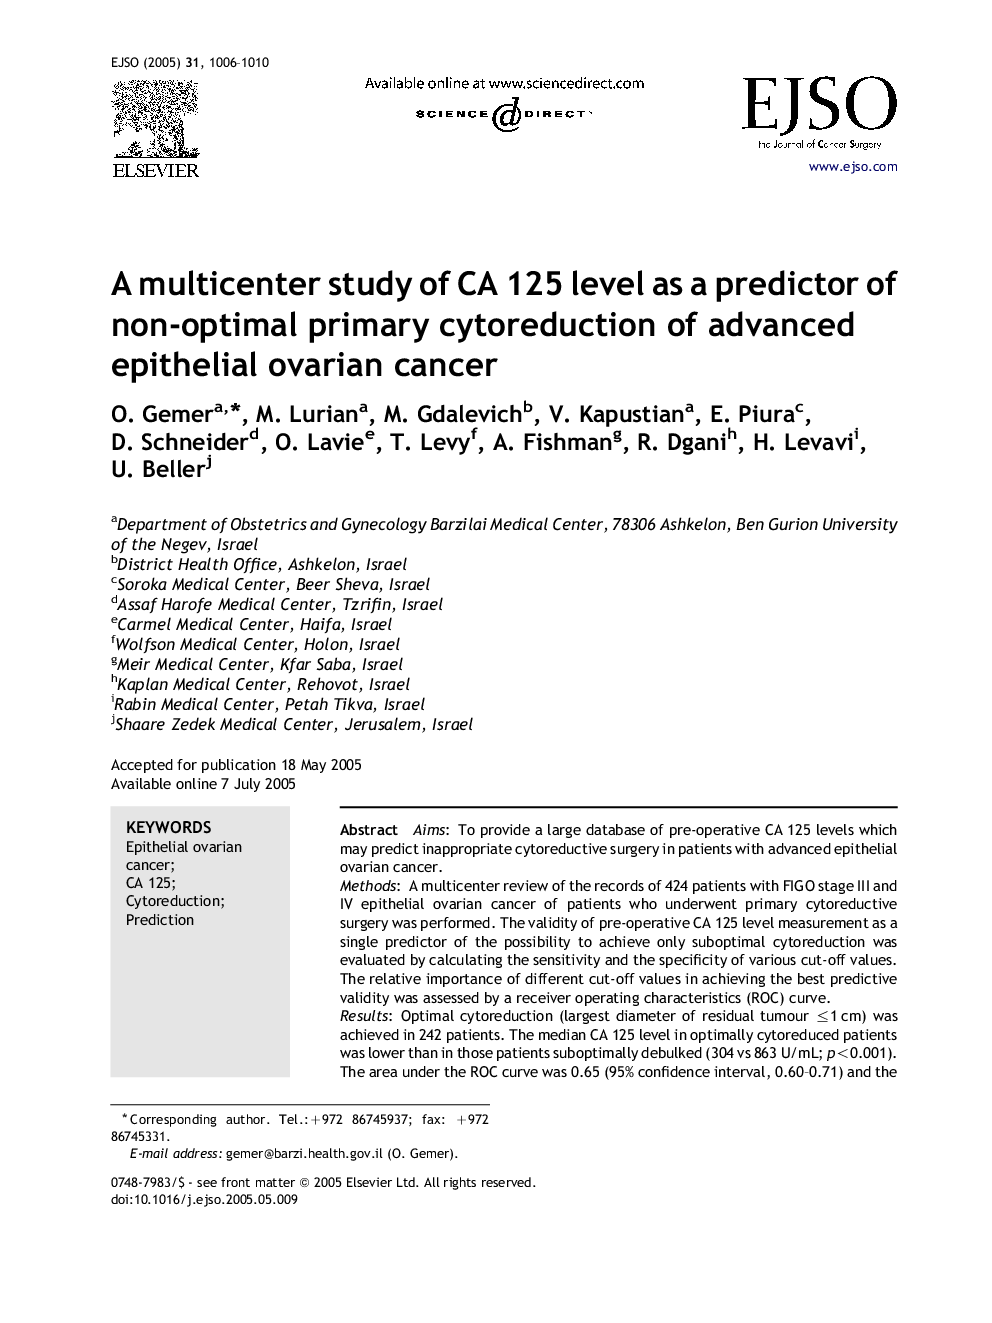 A multicenter study of CA 125 level as a predictor of non-optimal primary cytoreduction of advanced epithelial ovarian cancer